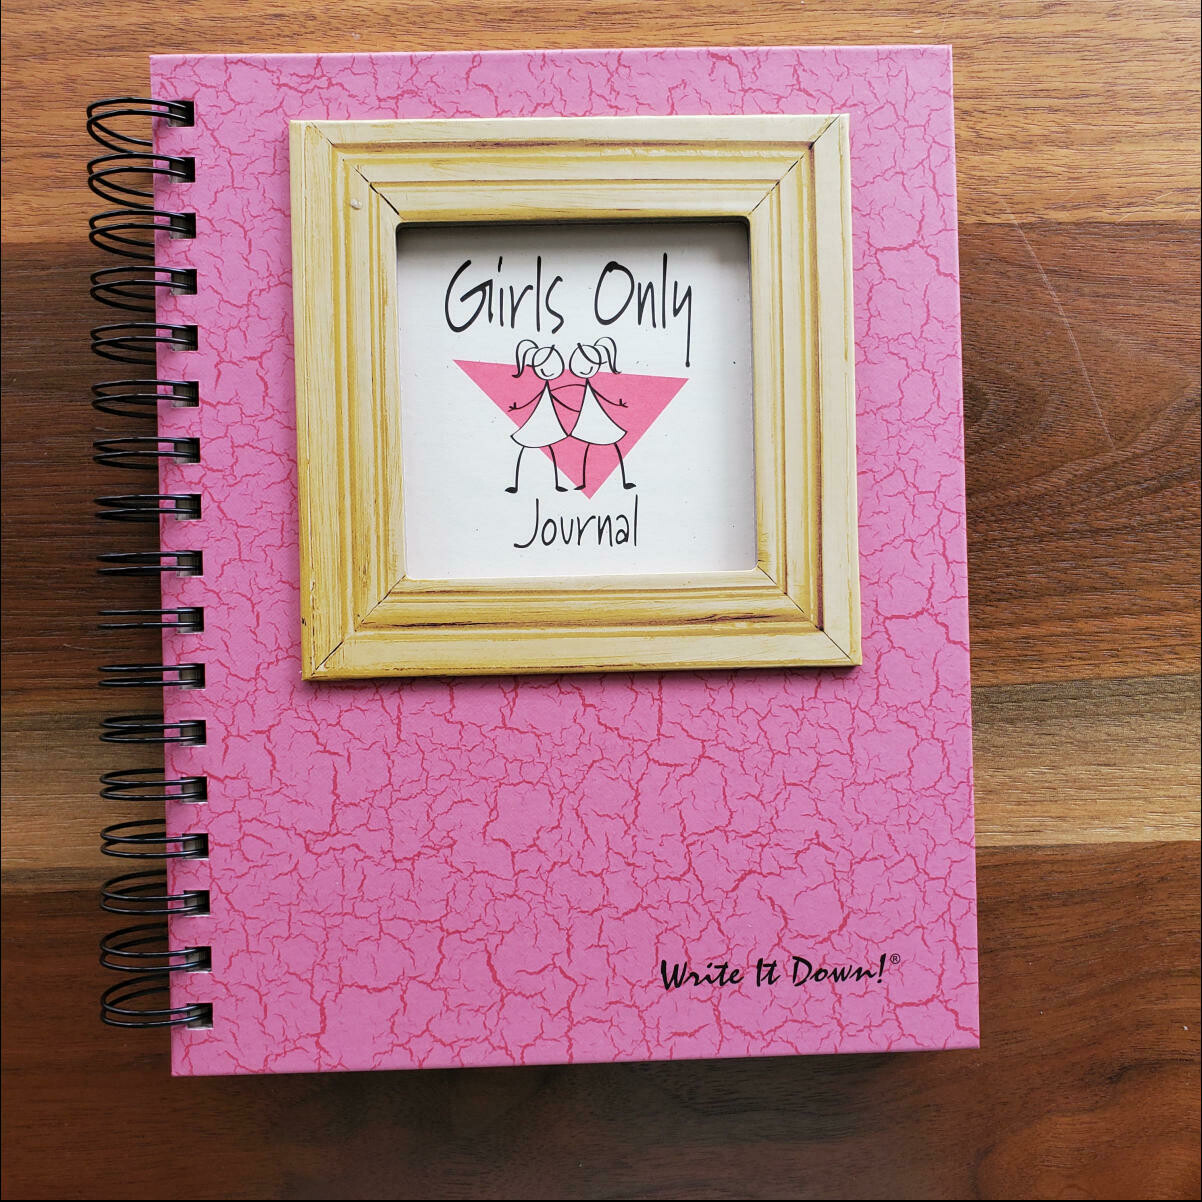 Journals Unlimited Girls Only Journal